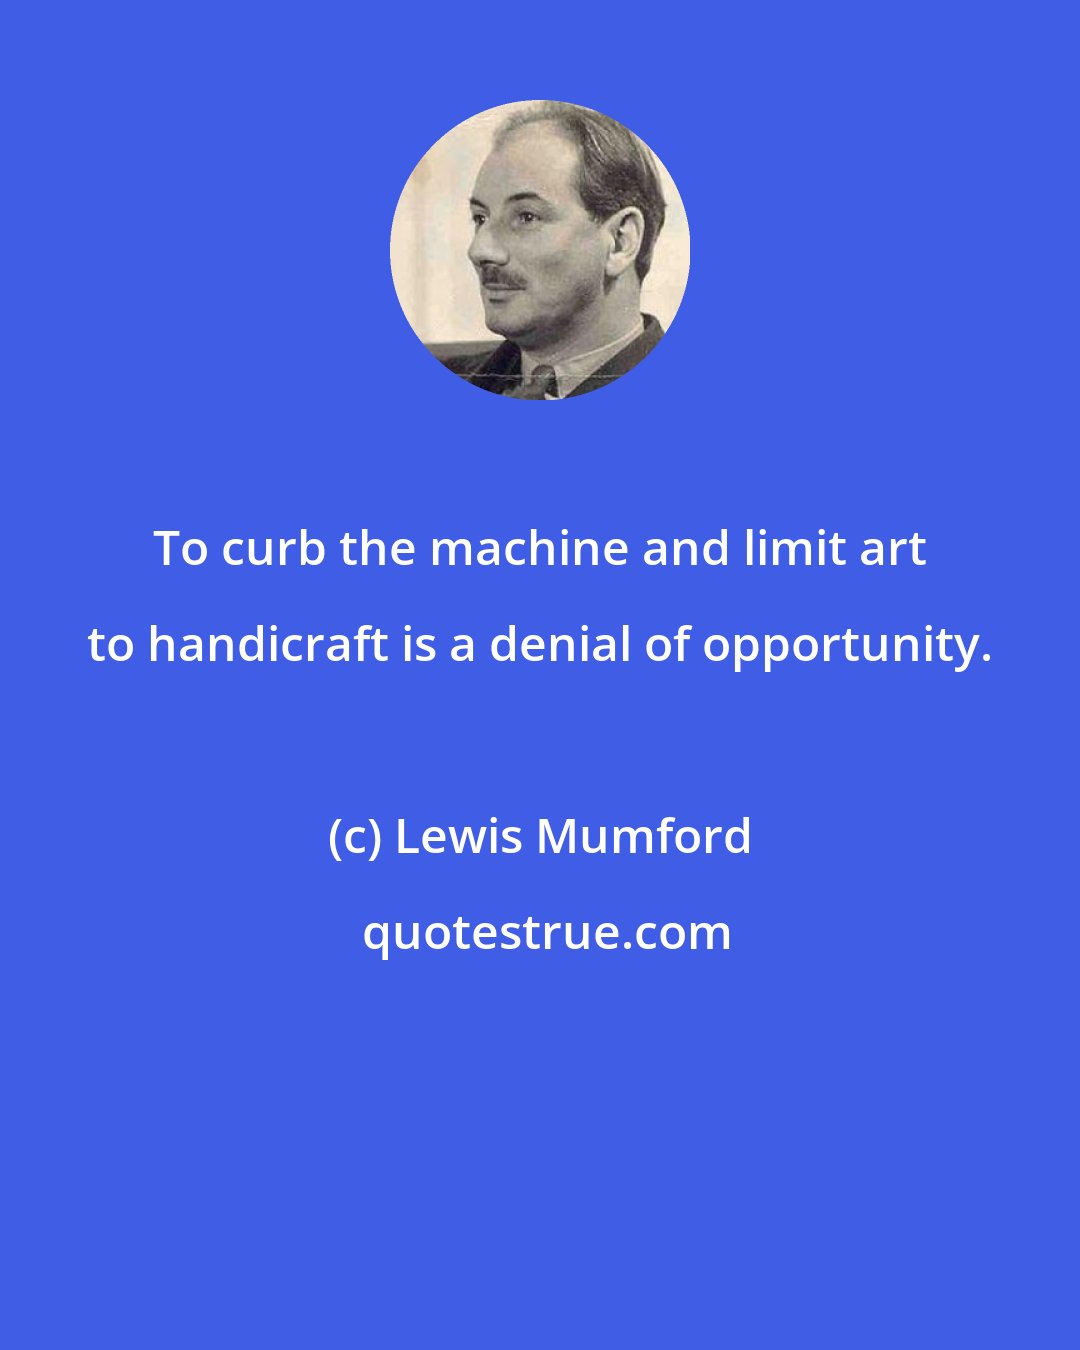 Lewis Mumford: To curb the machine and limit art to handicraft is a denial of opportunity.